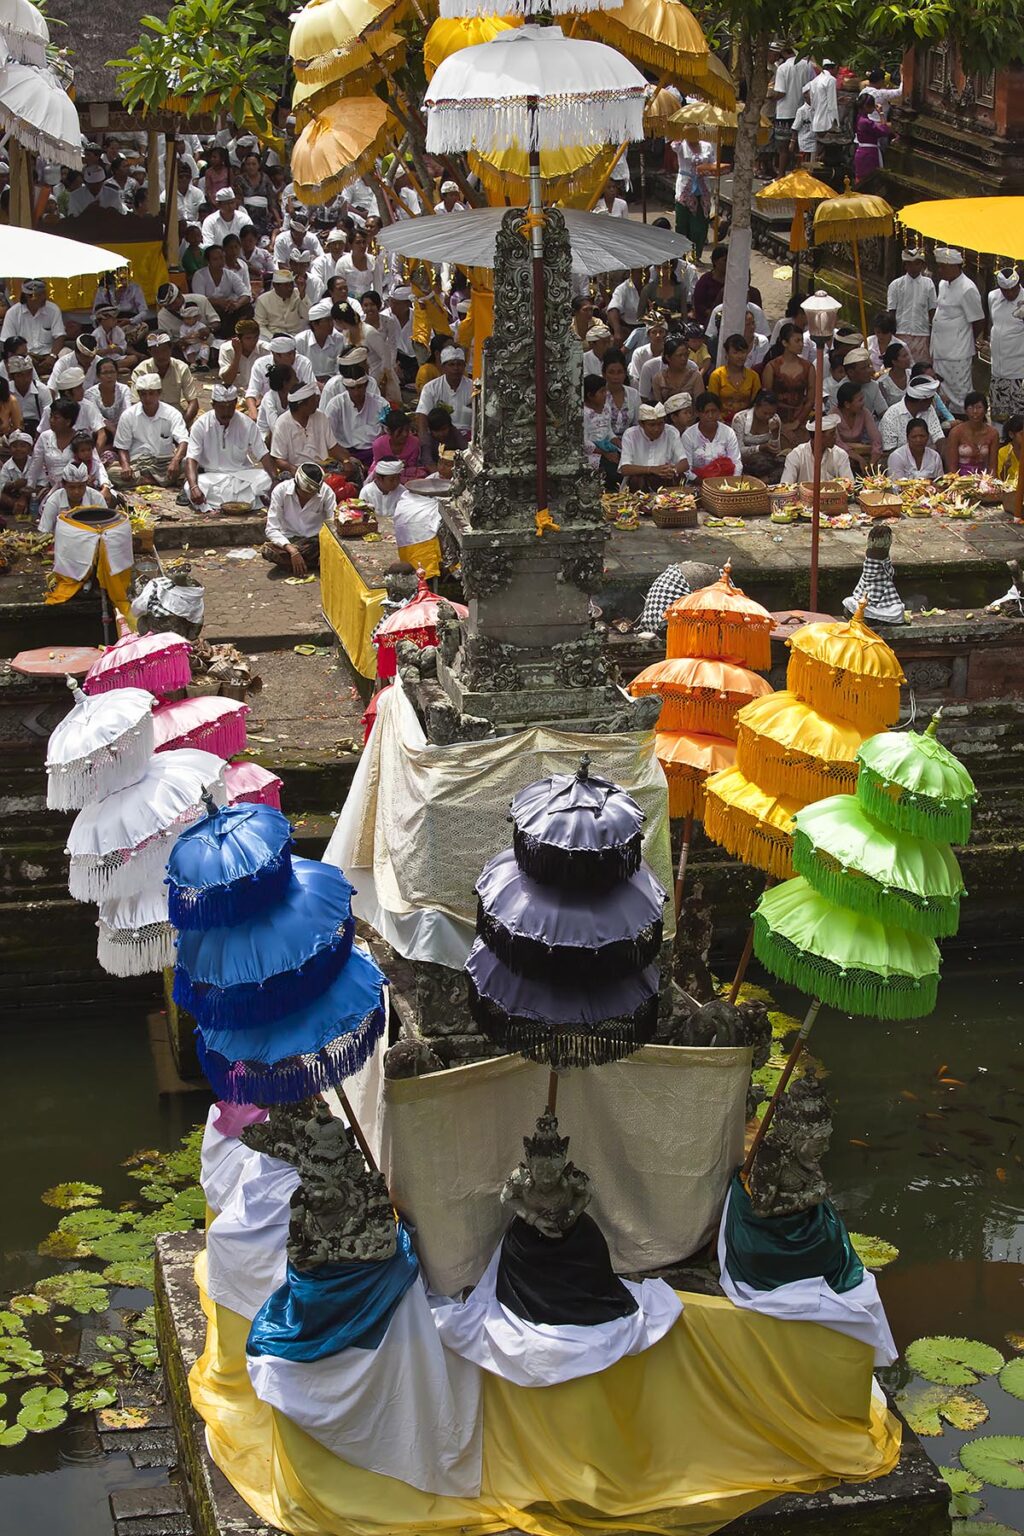 BALINESE faithful bring offerings to the PURA BEJI in the village of Mas during the GALUNGAN FESTIVAL - UBUD, BALI, INDONESIA